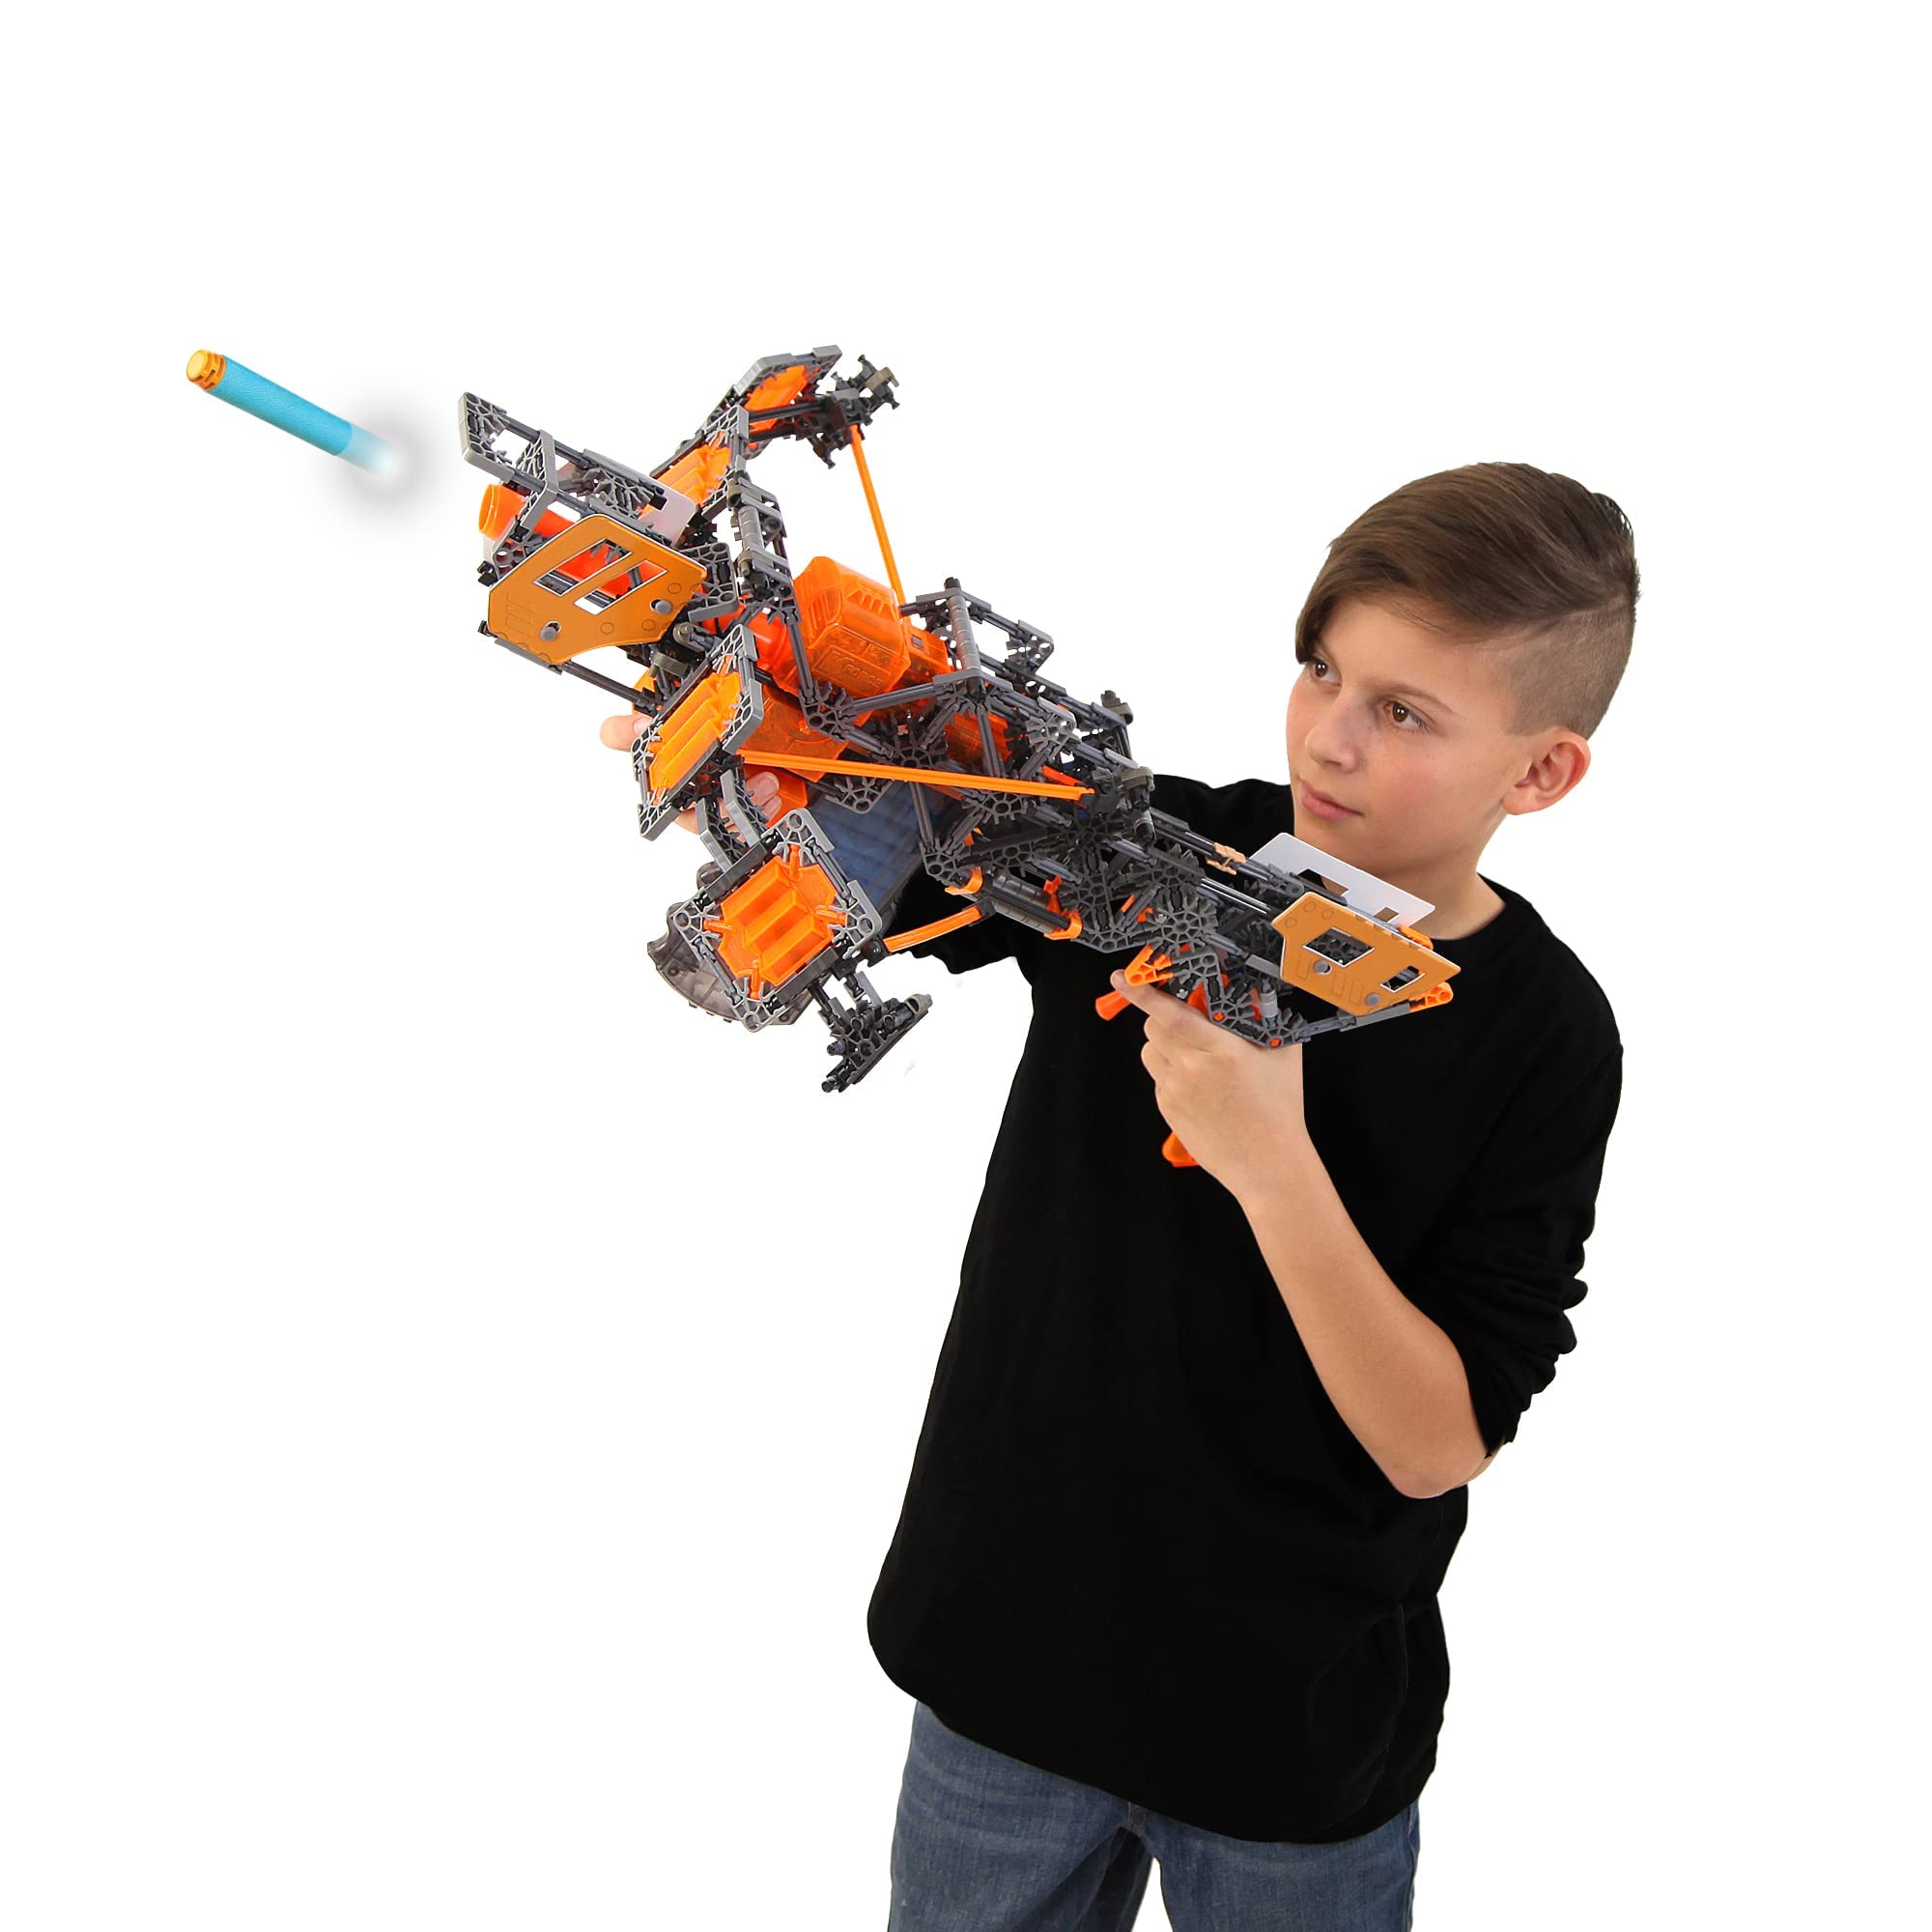 K'NEX Cyber-X C10 Crossover Legacy with Motor - Blasts up to 60 ft - 460 Pieces, 7 Builds, Targets, 10 Darts - Great Gift Kids 8+